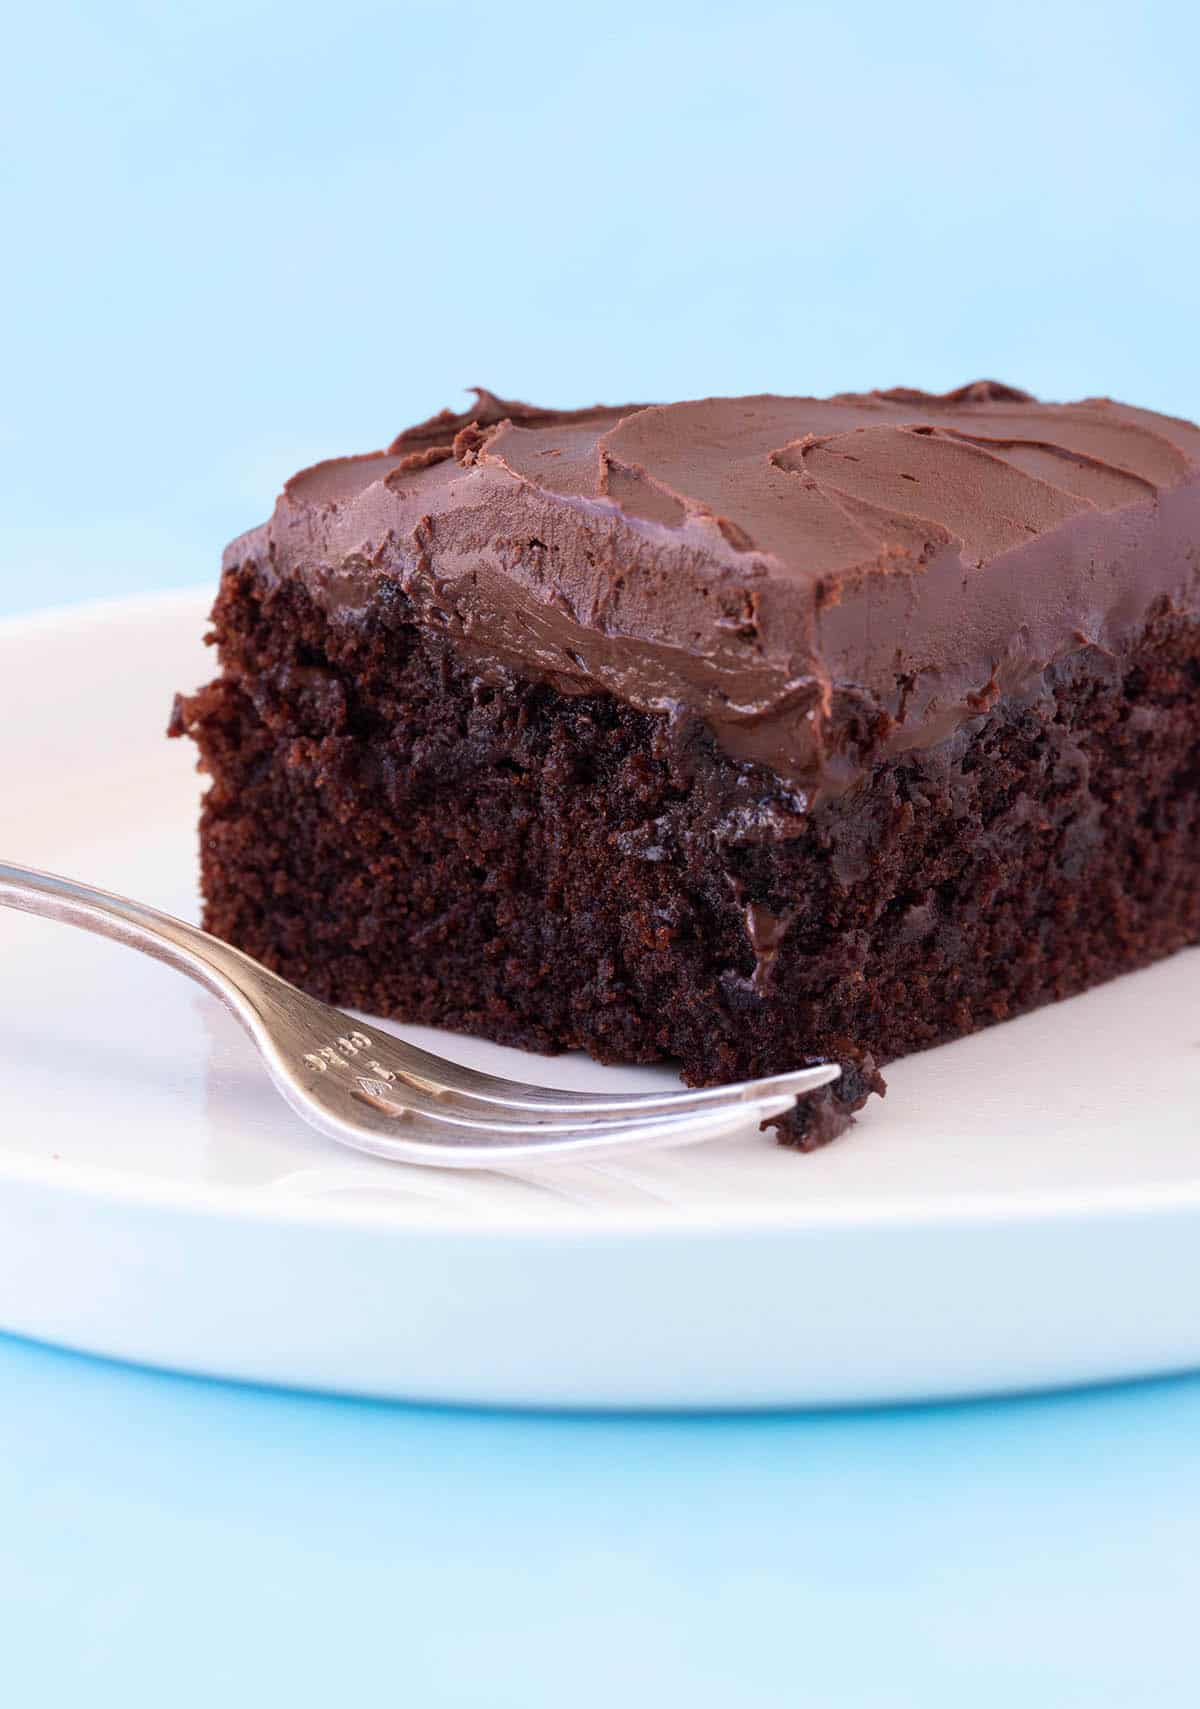 A slice of Chocolate Cake on a white plate with a serving fork